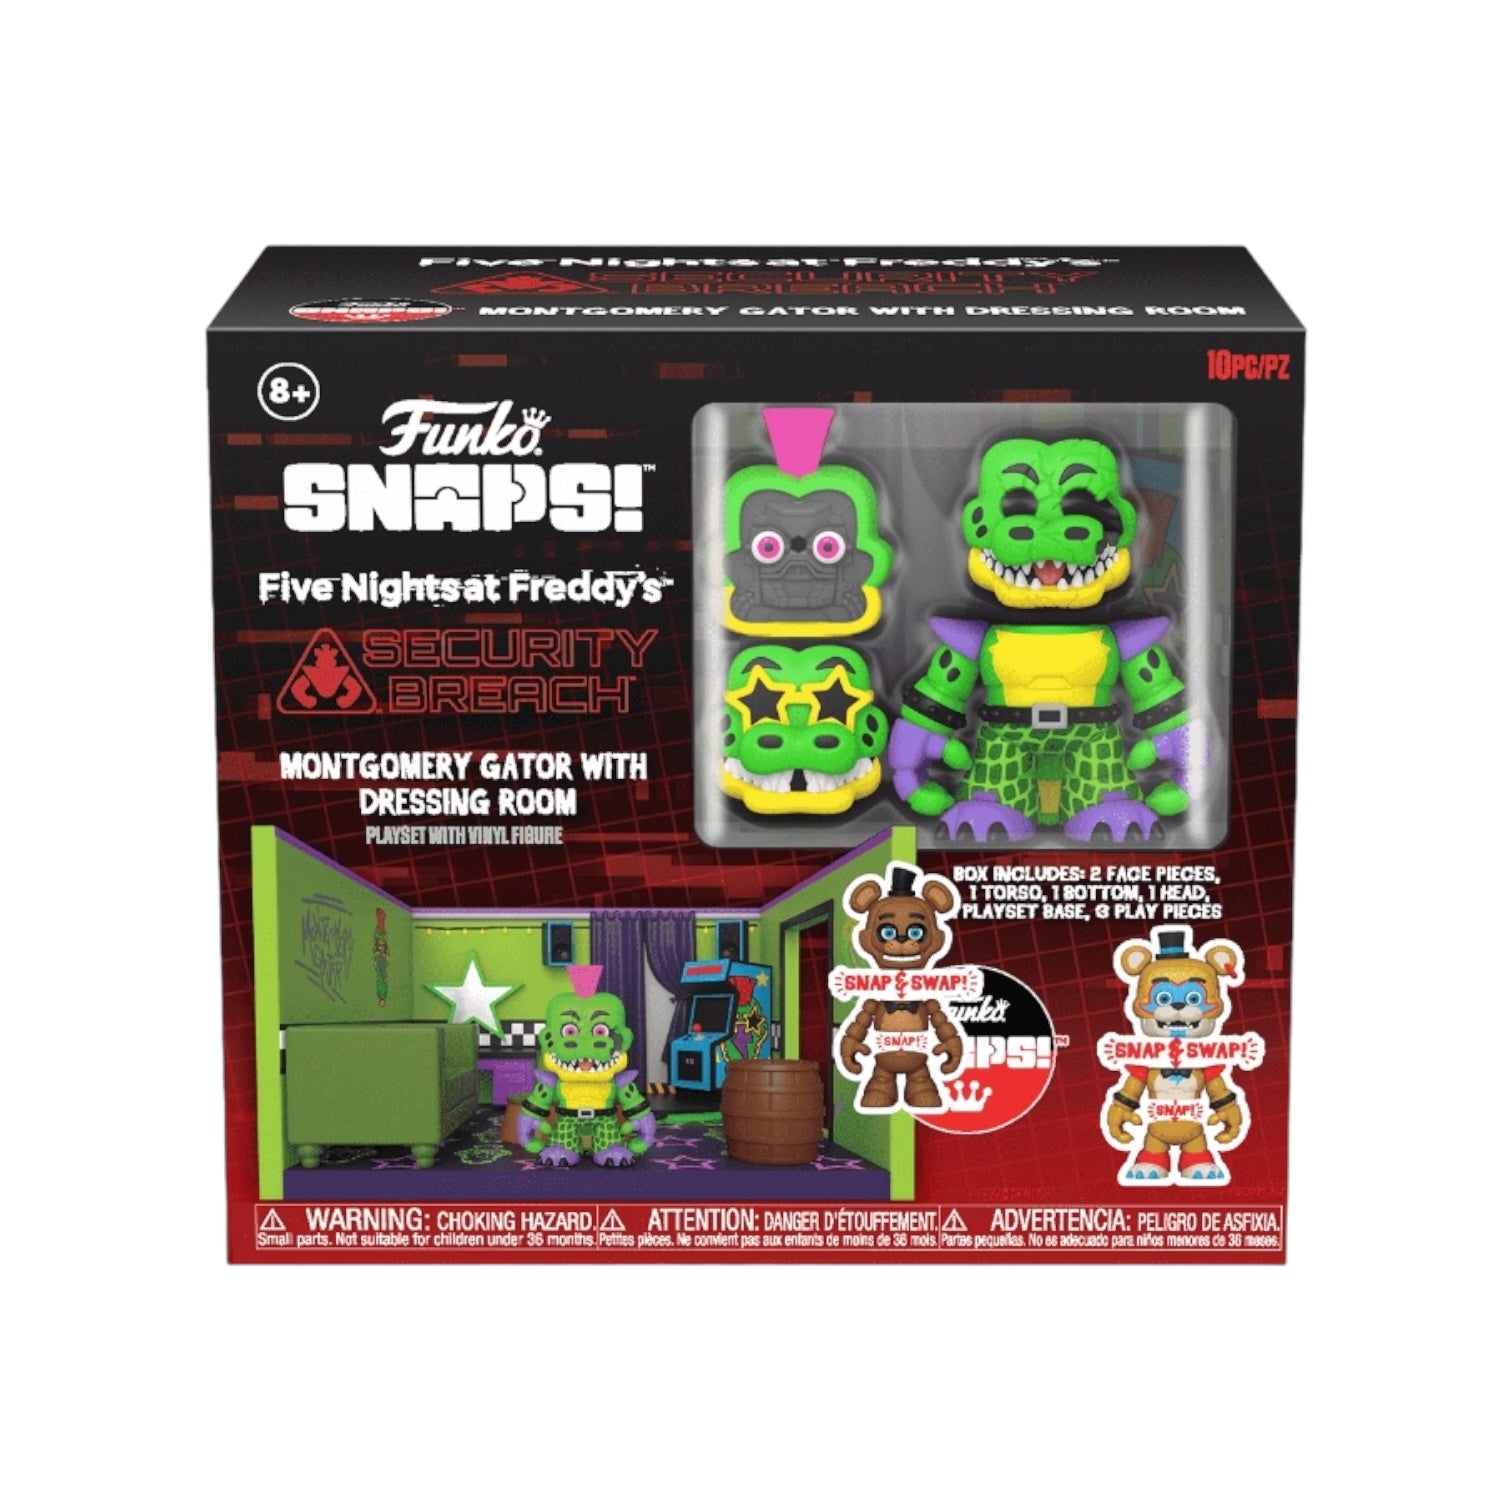 Montgomery Gator with Dressing Room Funko Snaps - Five Nights at Freddy's